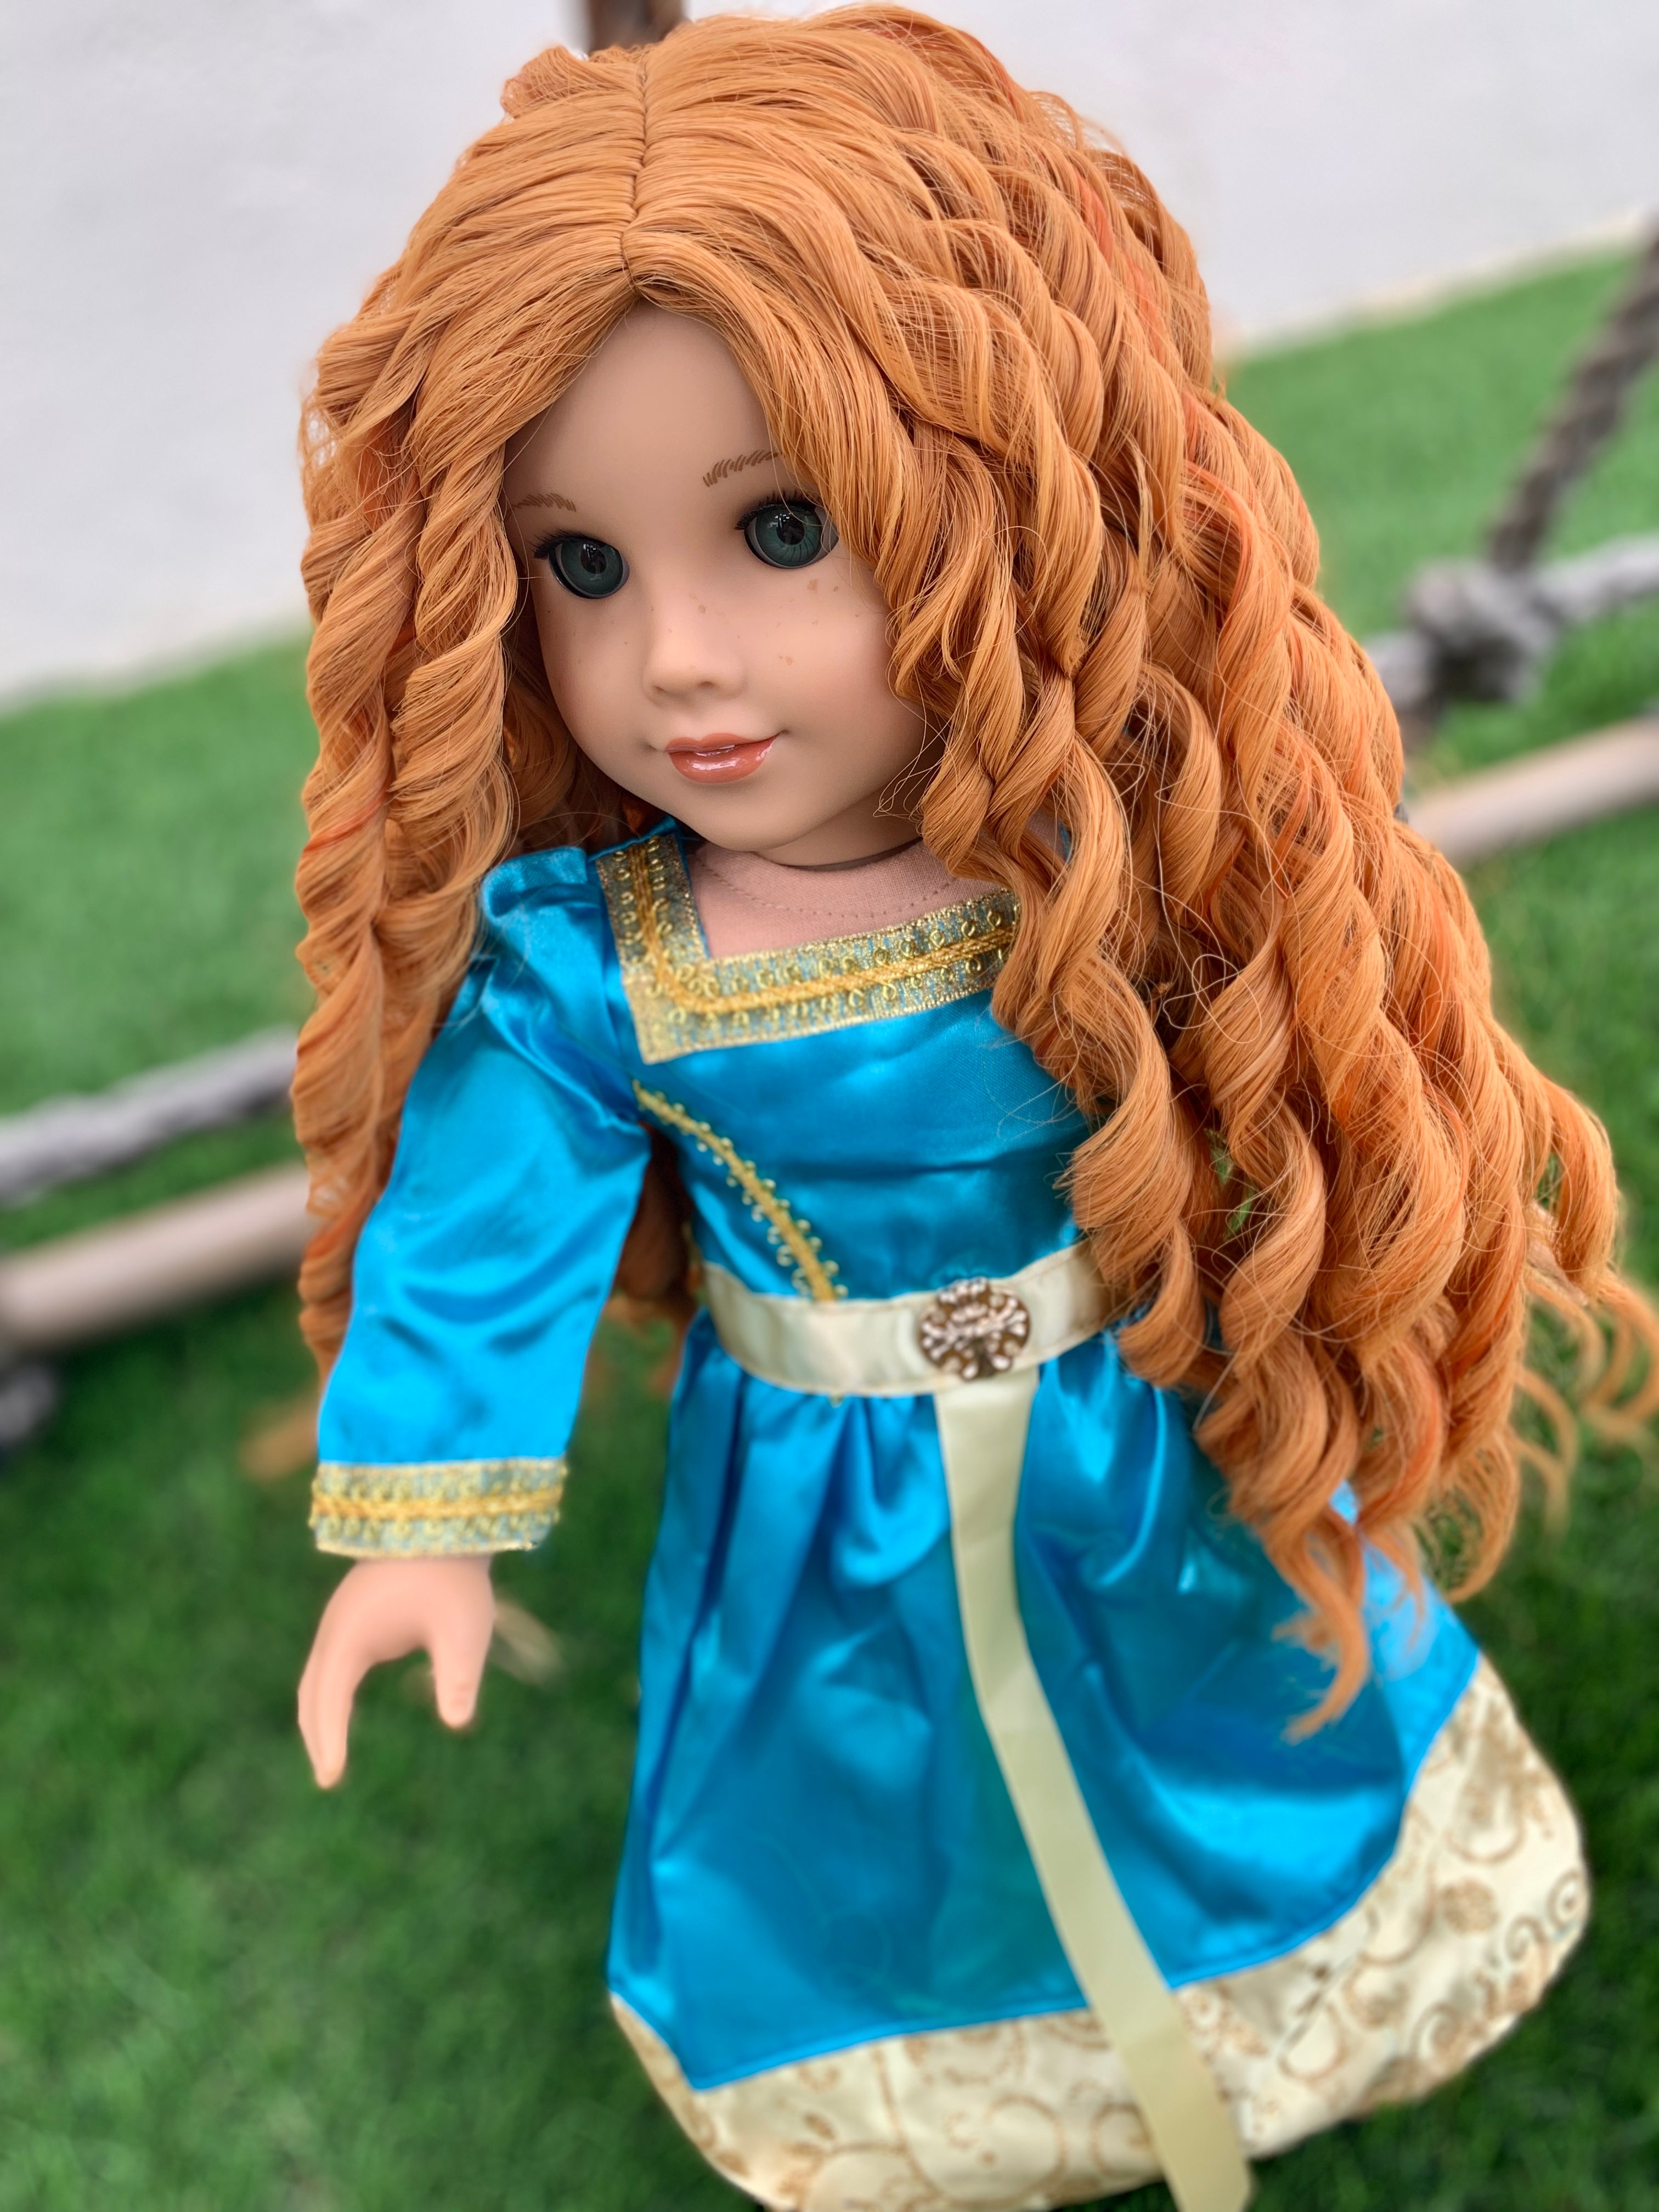 Zazou Dolls Exclusive  WIG Brave for 18 Inch dolls such as Our generation, Journey Girls and American Girl